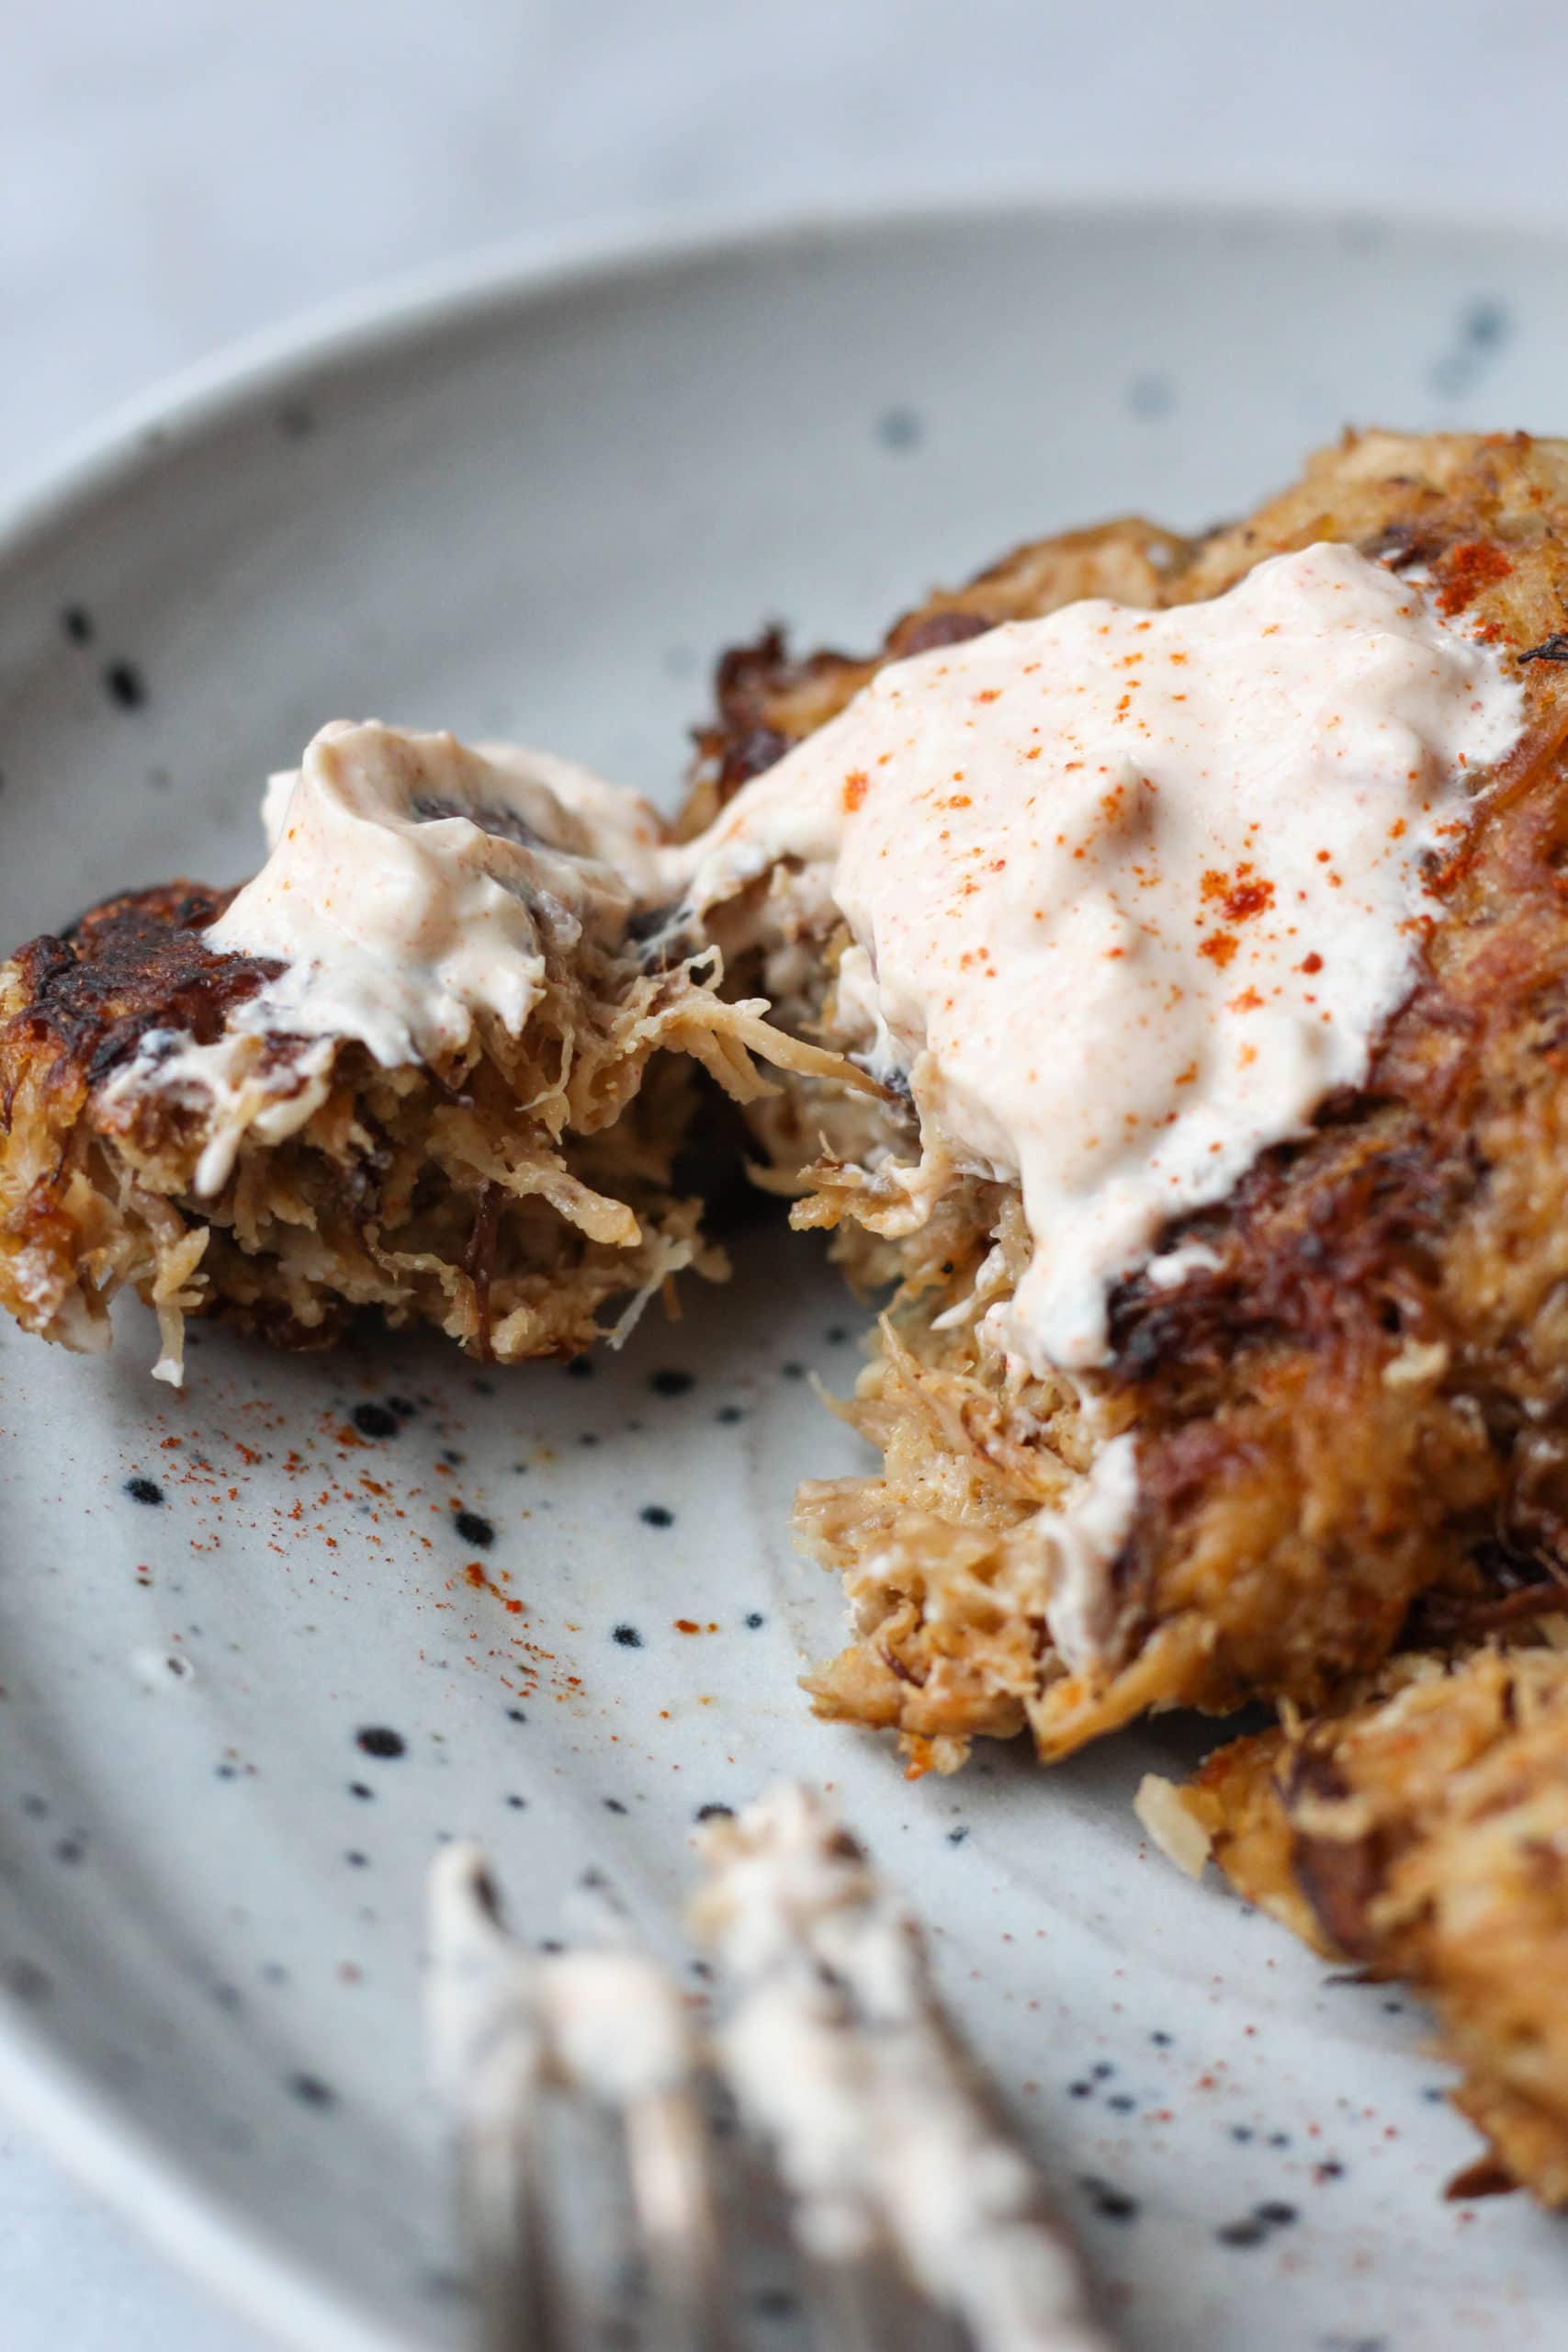 A platter of mushroom "crab" cakes topped with a remoulade sauce